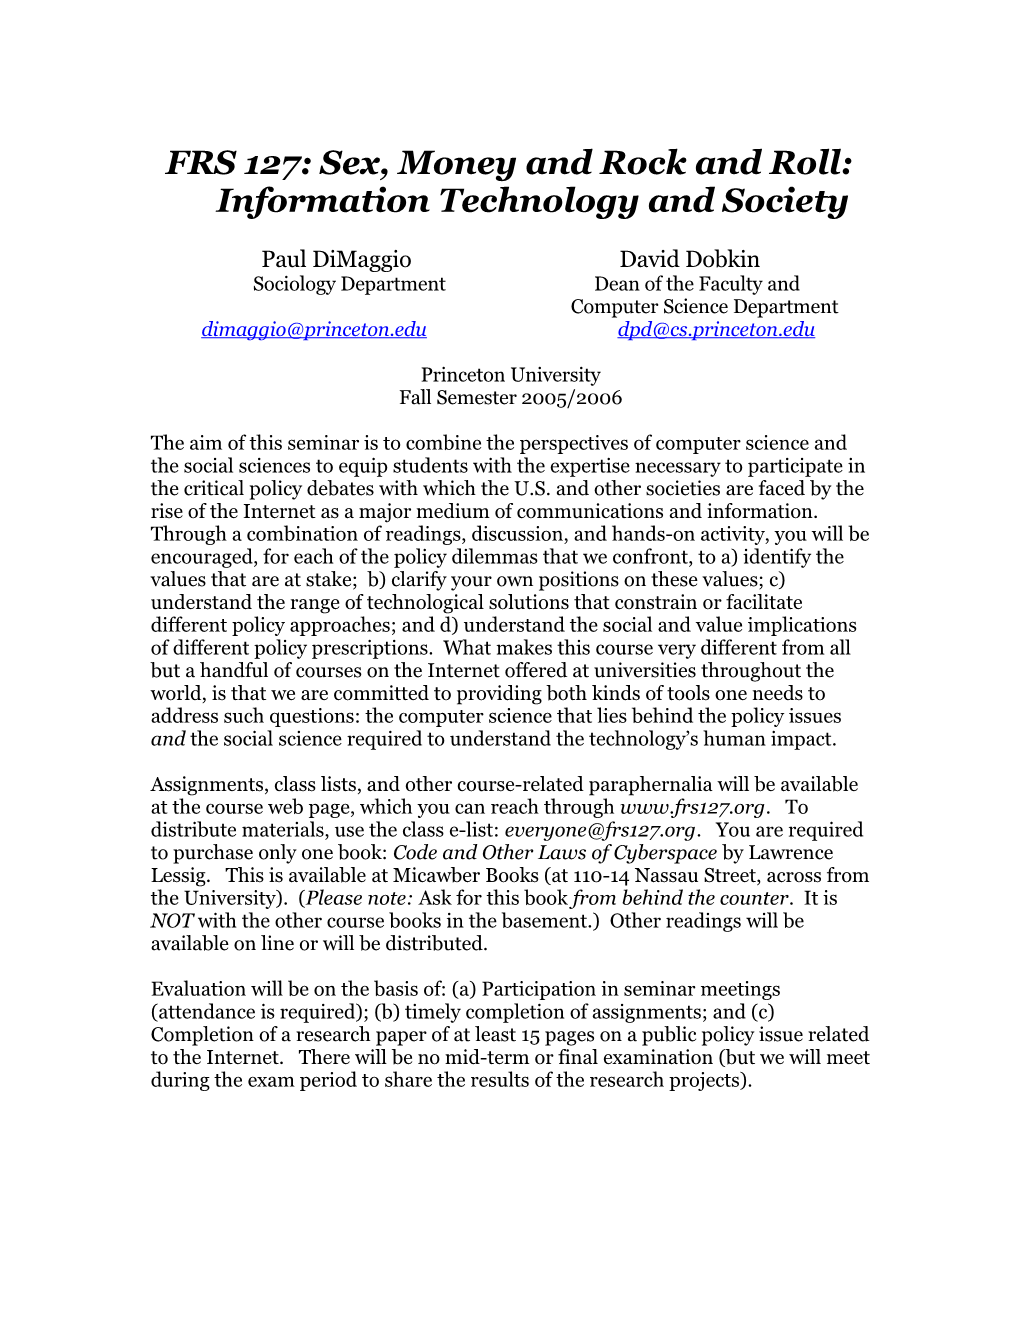 FRS 127: Sex, Money and Rock and Roll: Information Technology and Society